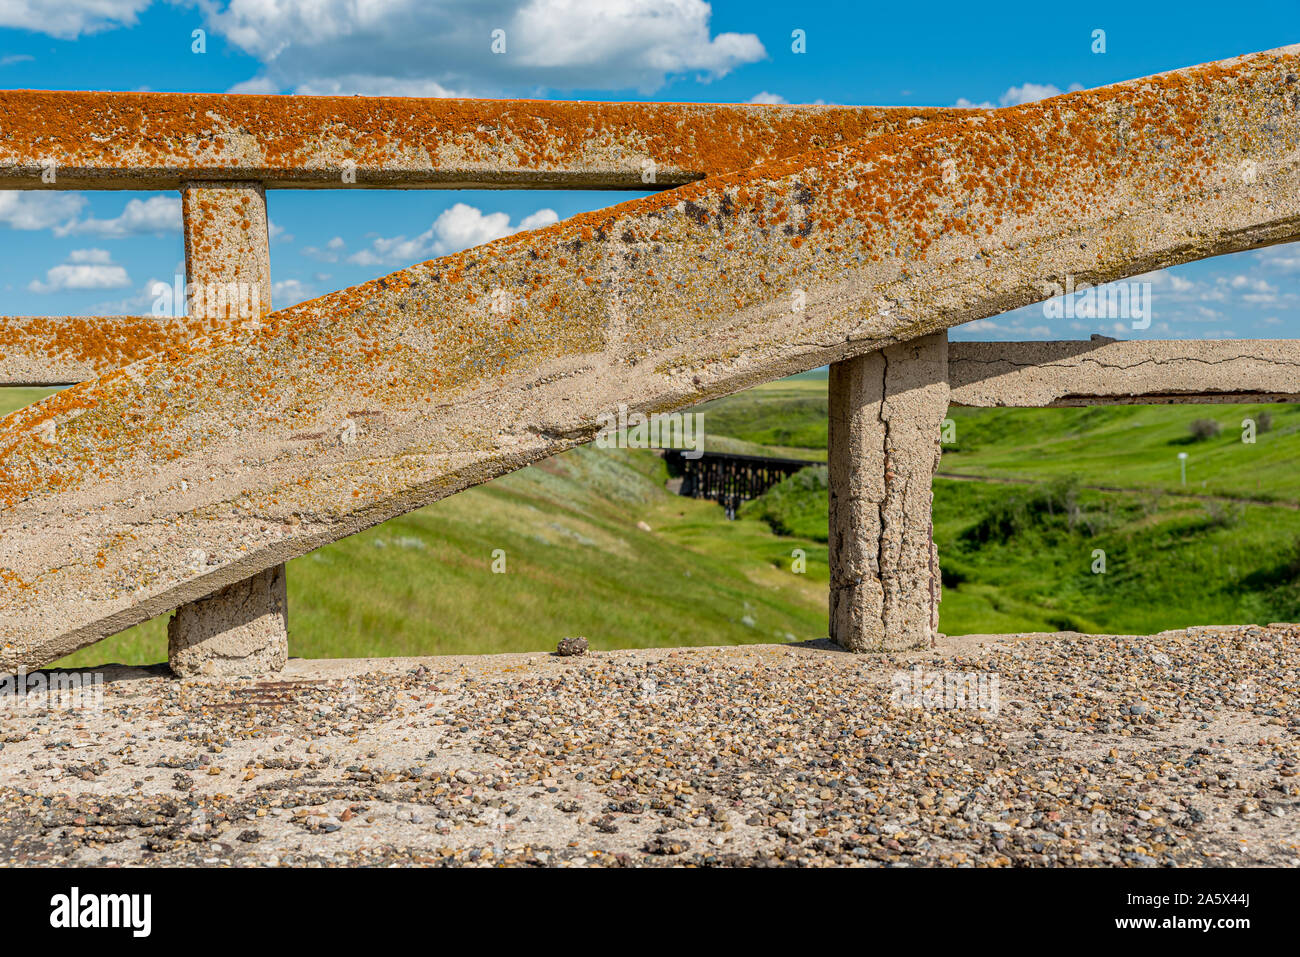 Lichen-covered arch from the concrete bridge in Scotsguard, SK with a historic railway tressle in the background Stock Photo